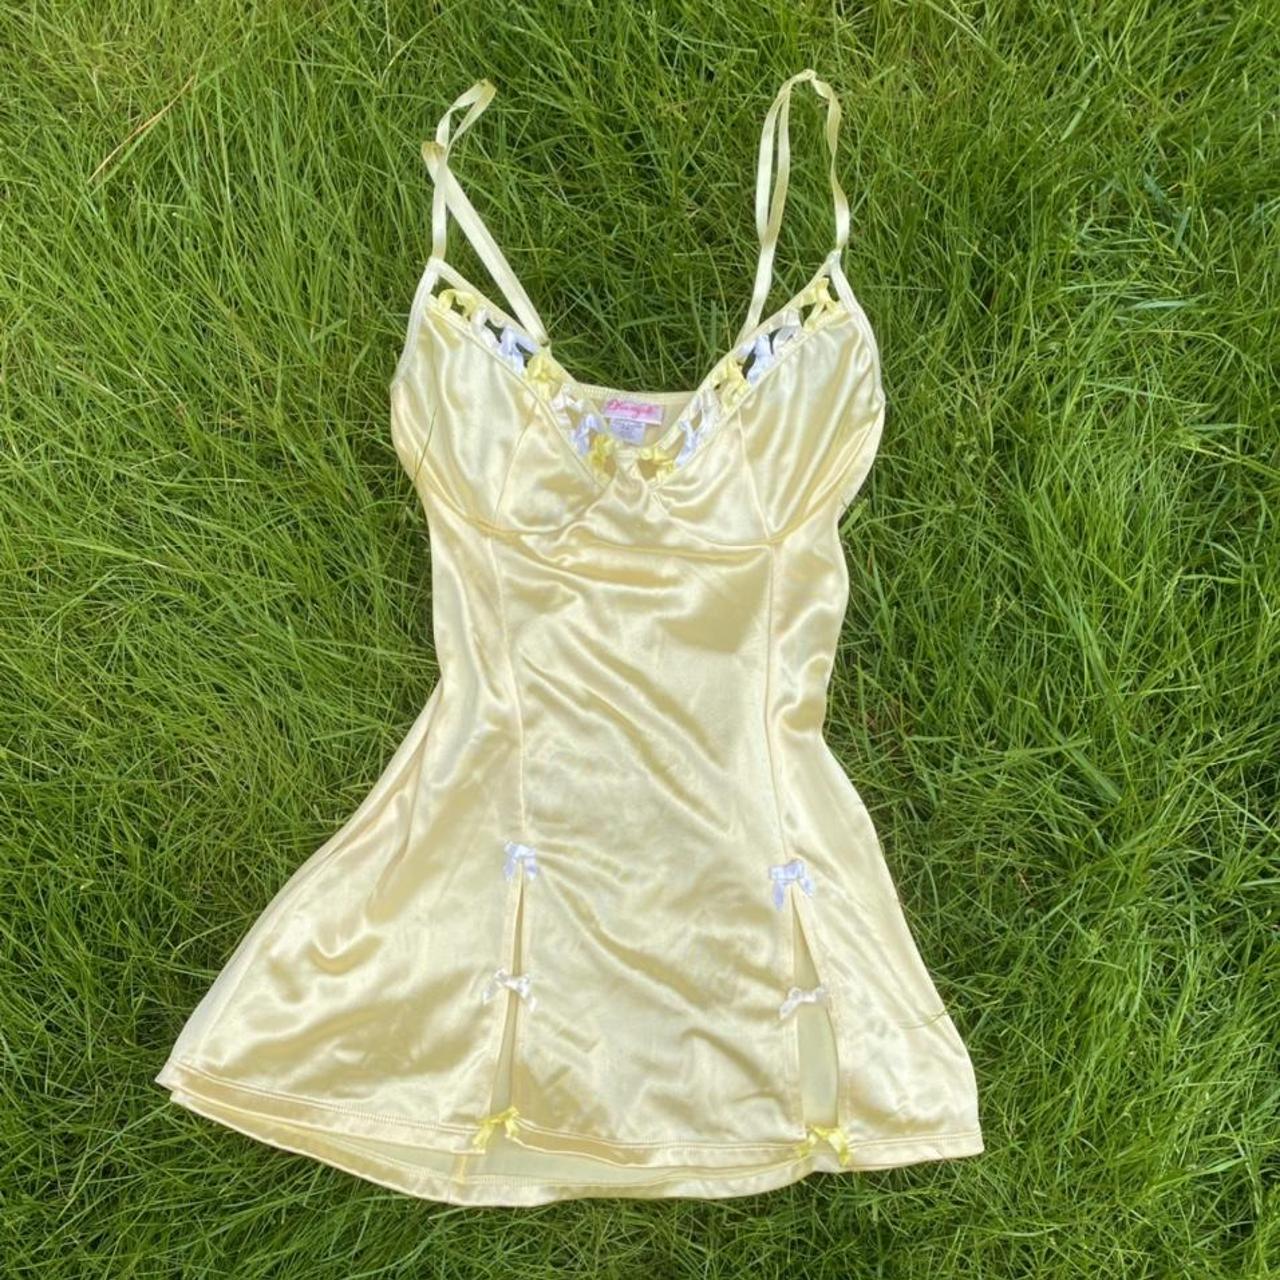 Dreamgirl Women's Gold and Yellow Top